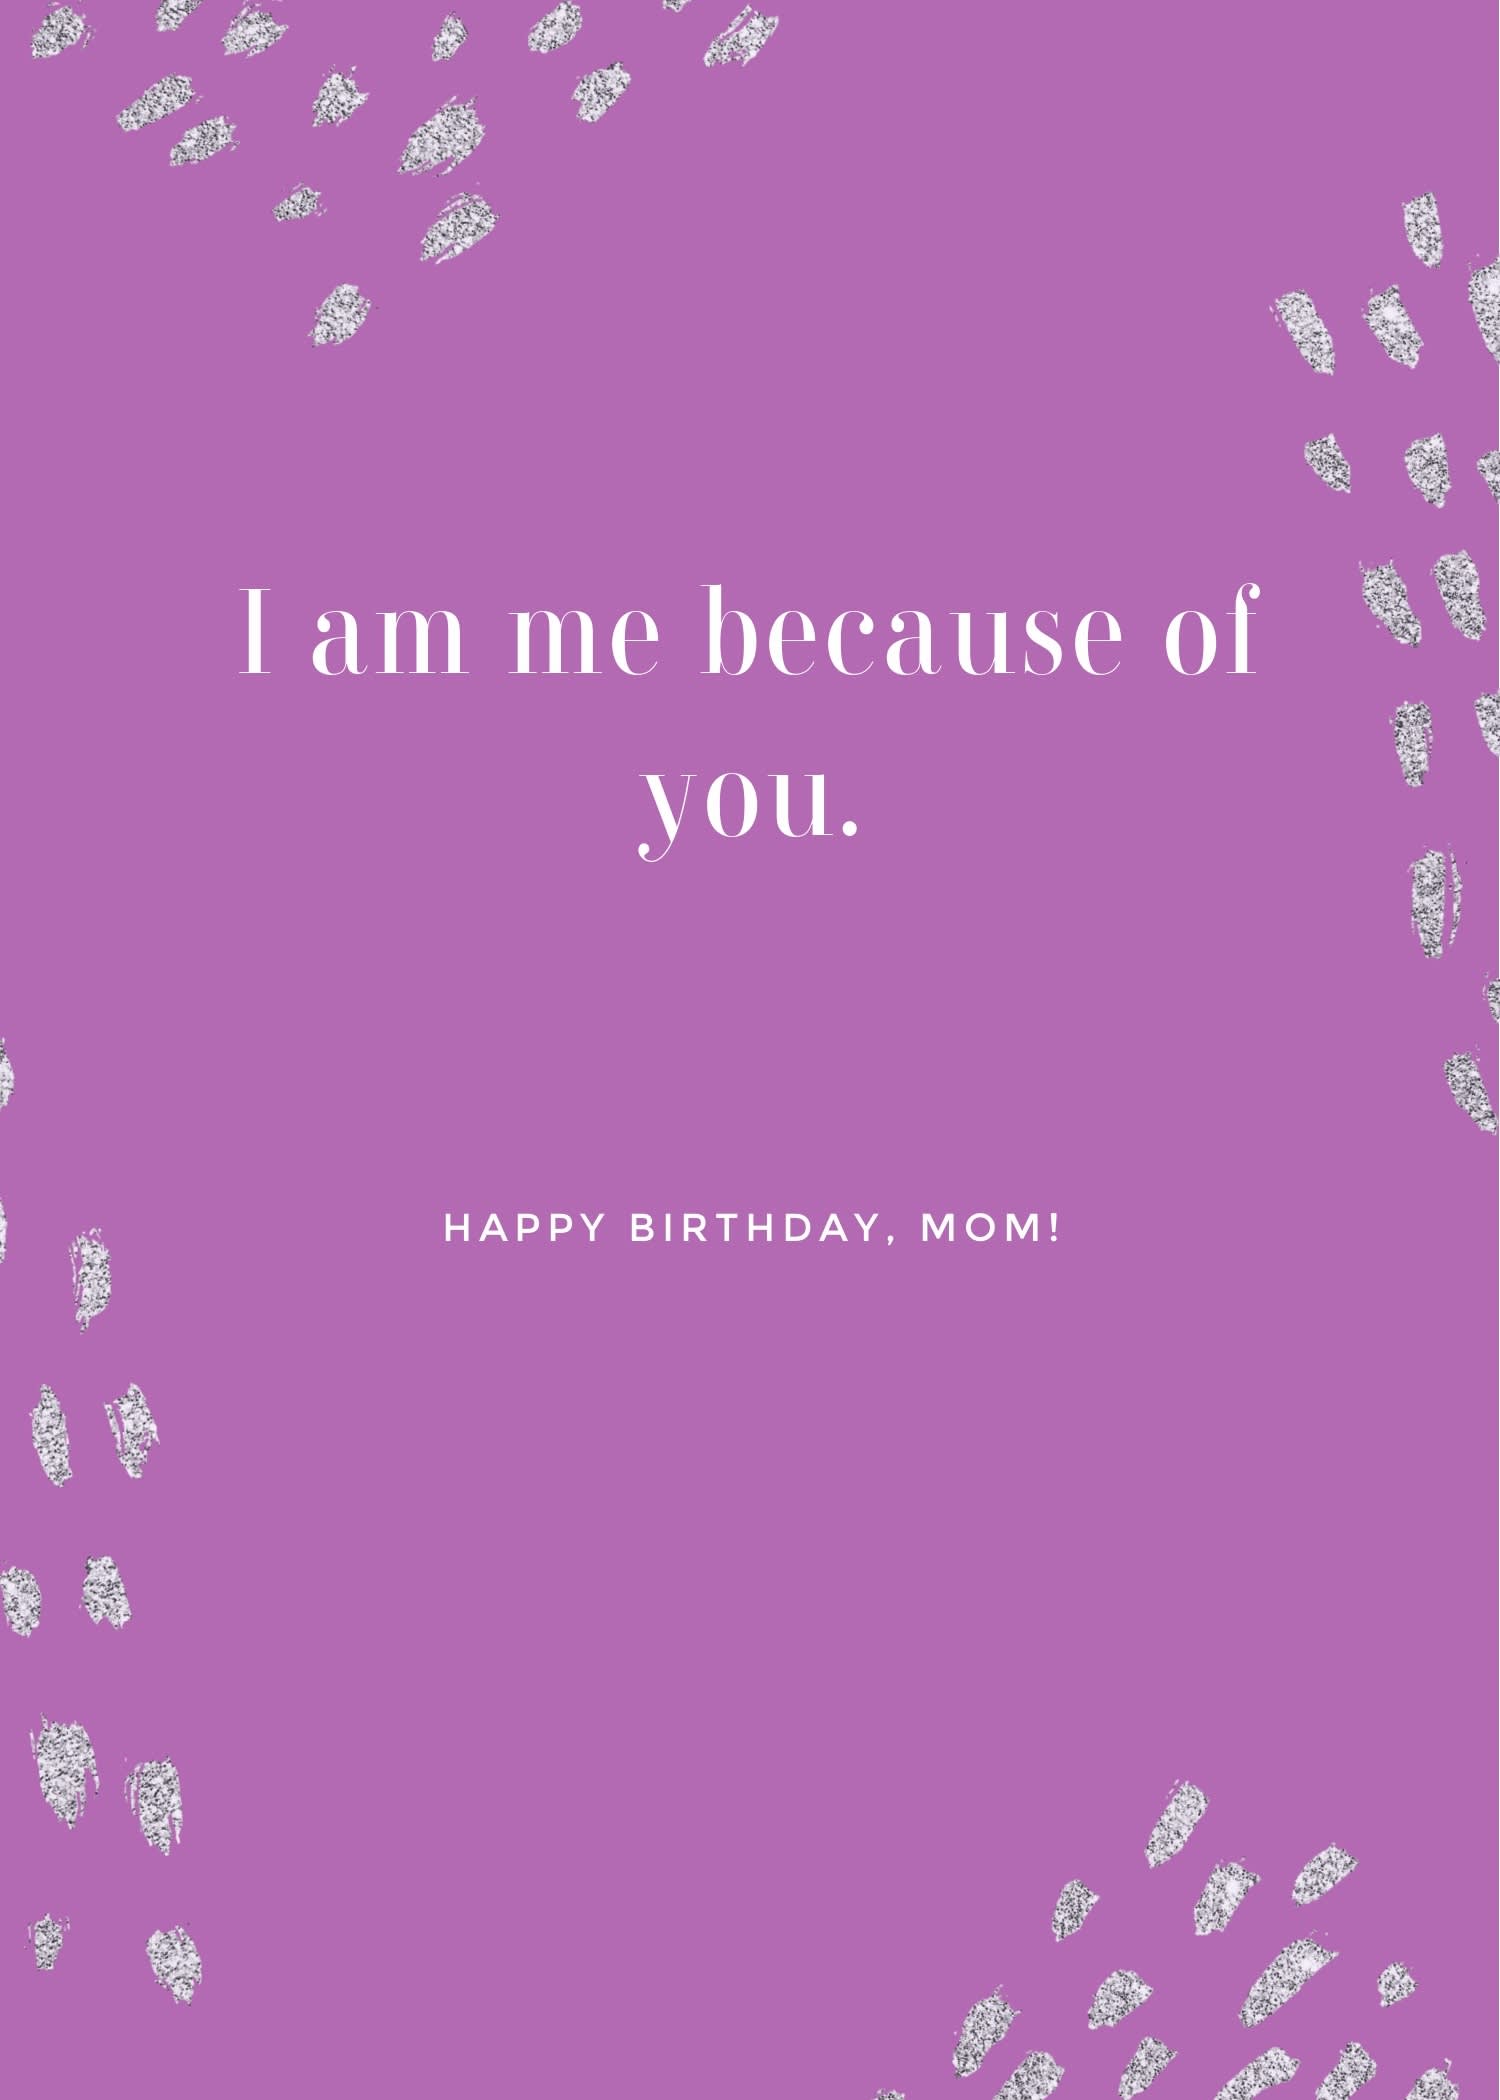 Happy Birthday Wishes for Mom, Card Maker